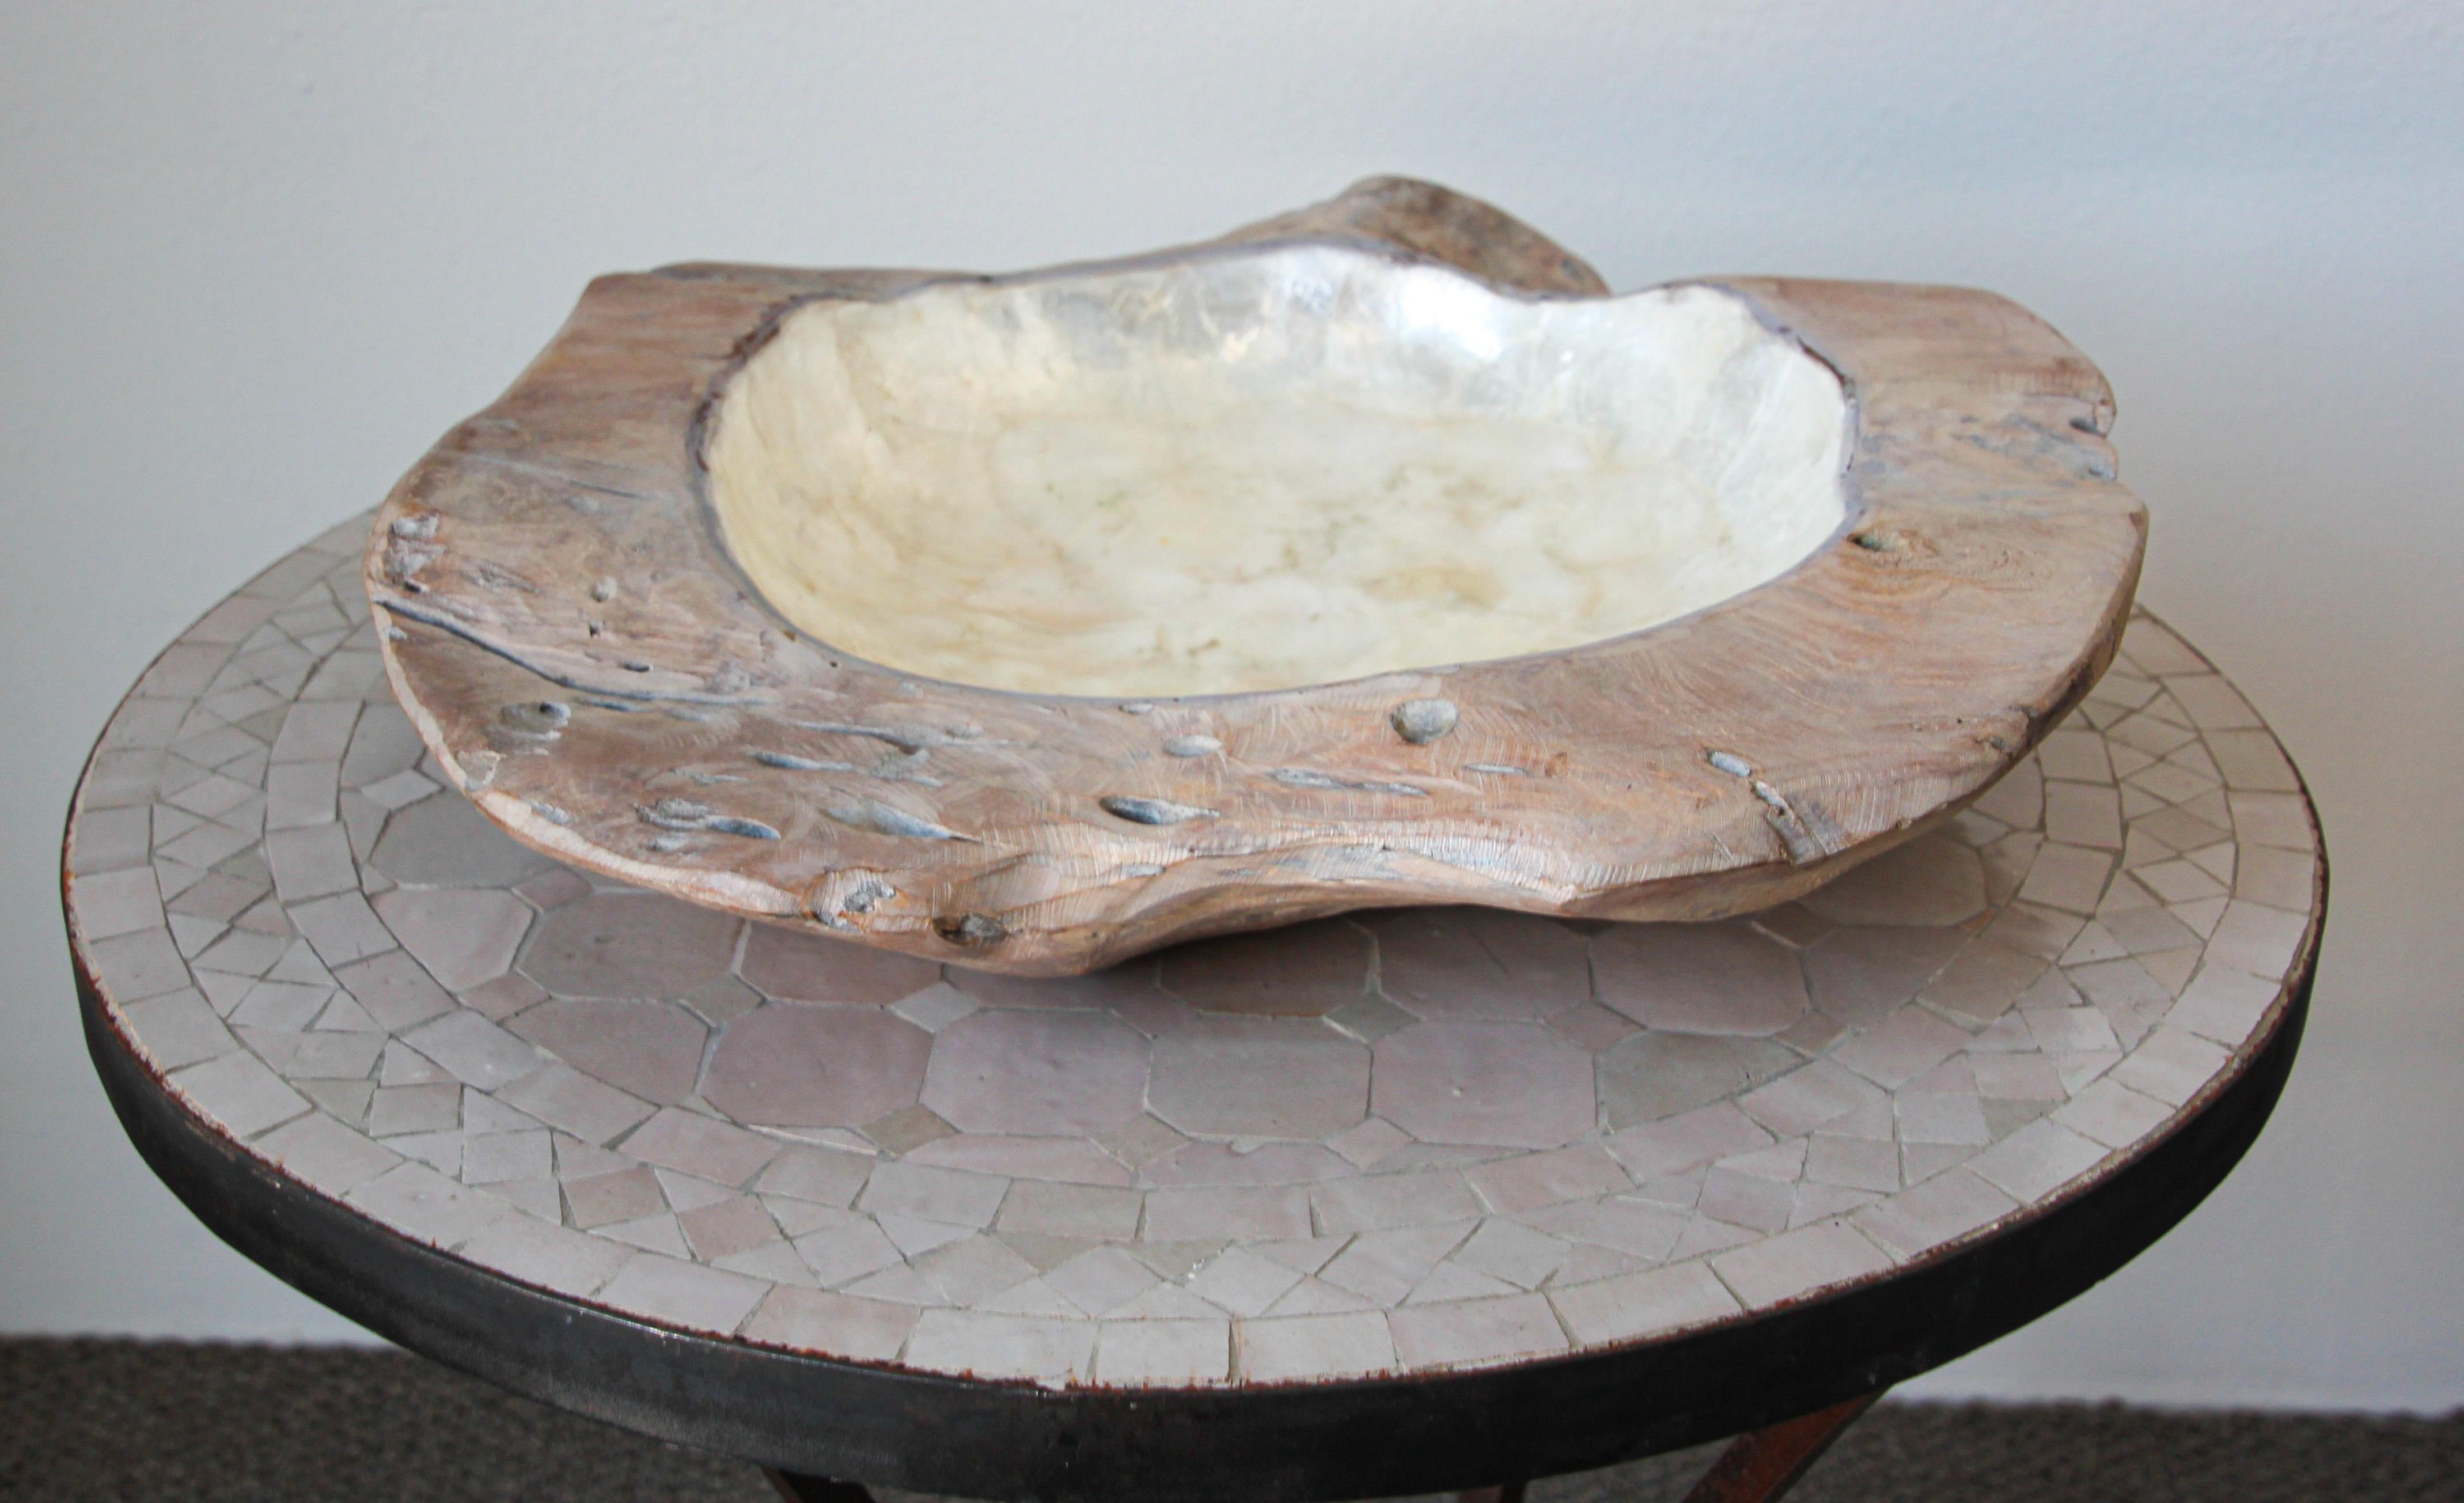 Exceptionally crafted and large sculptural brutalist freeform teak wood centerpiece bowl.
Hand carved from a unique piece of wood this organic capiz bowl is crafted of natural whitewashed teakwood and lined with lustrous authentic capiz